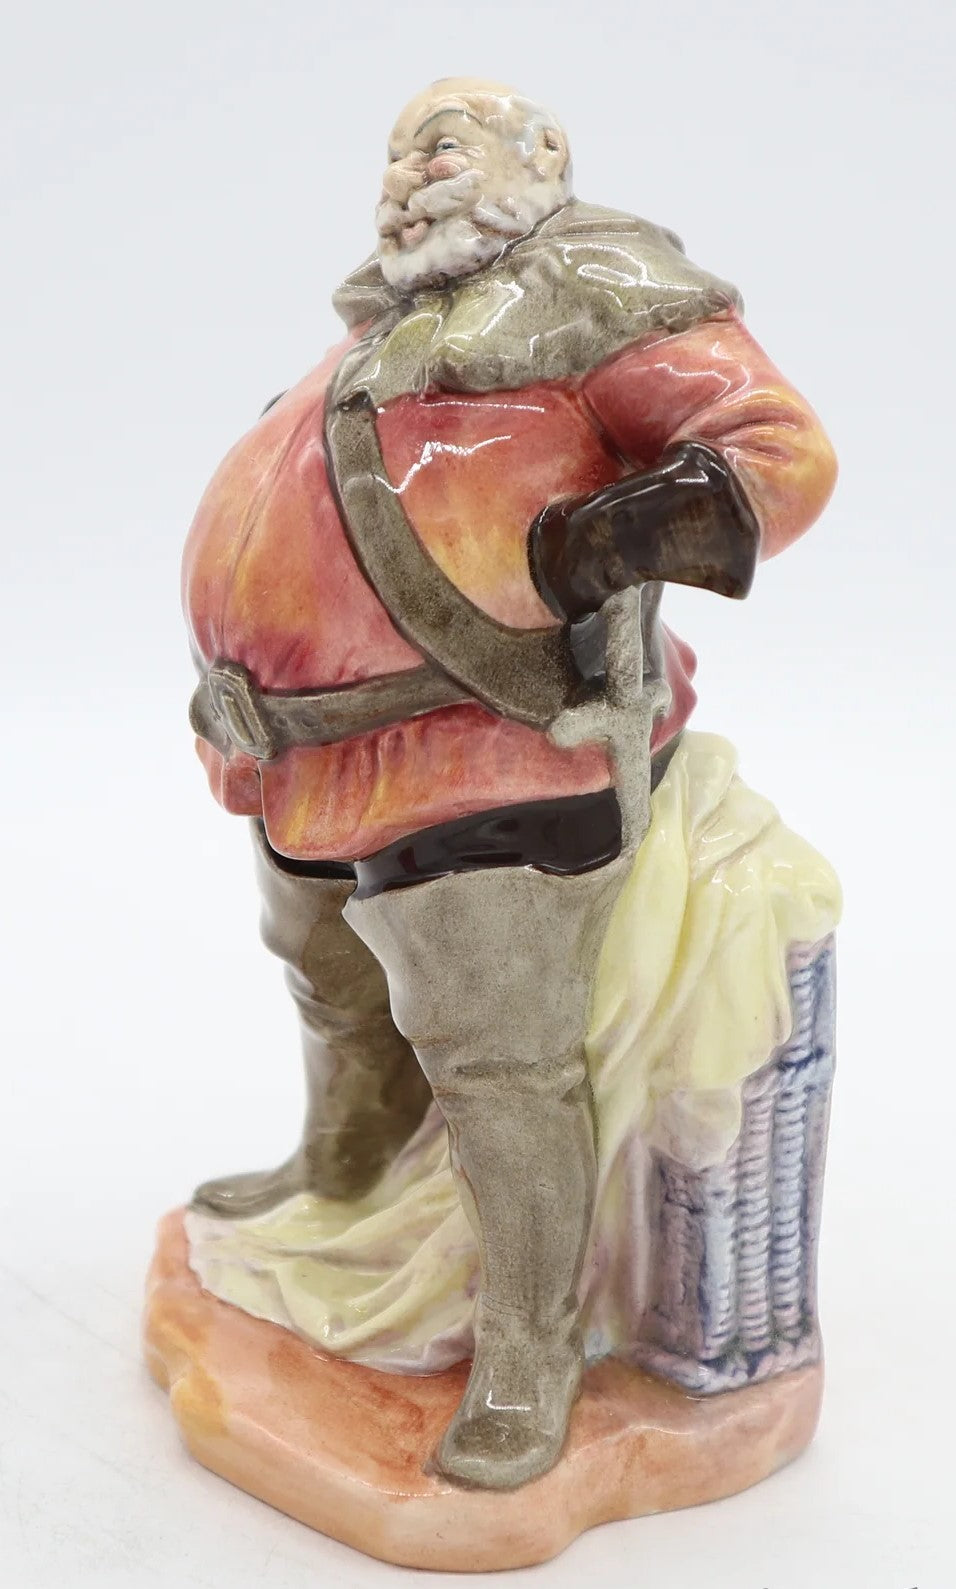 Royal Doulton Falstaff figurine hn3236 hand made and painted in England - Royal Gift